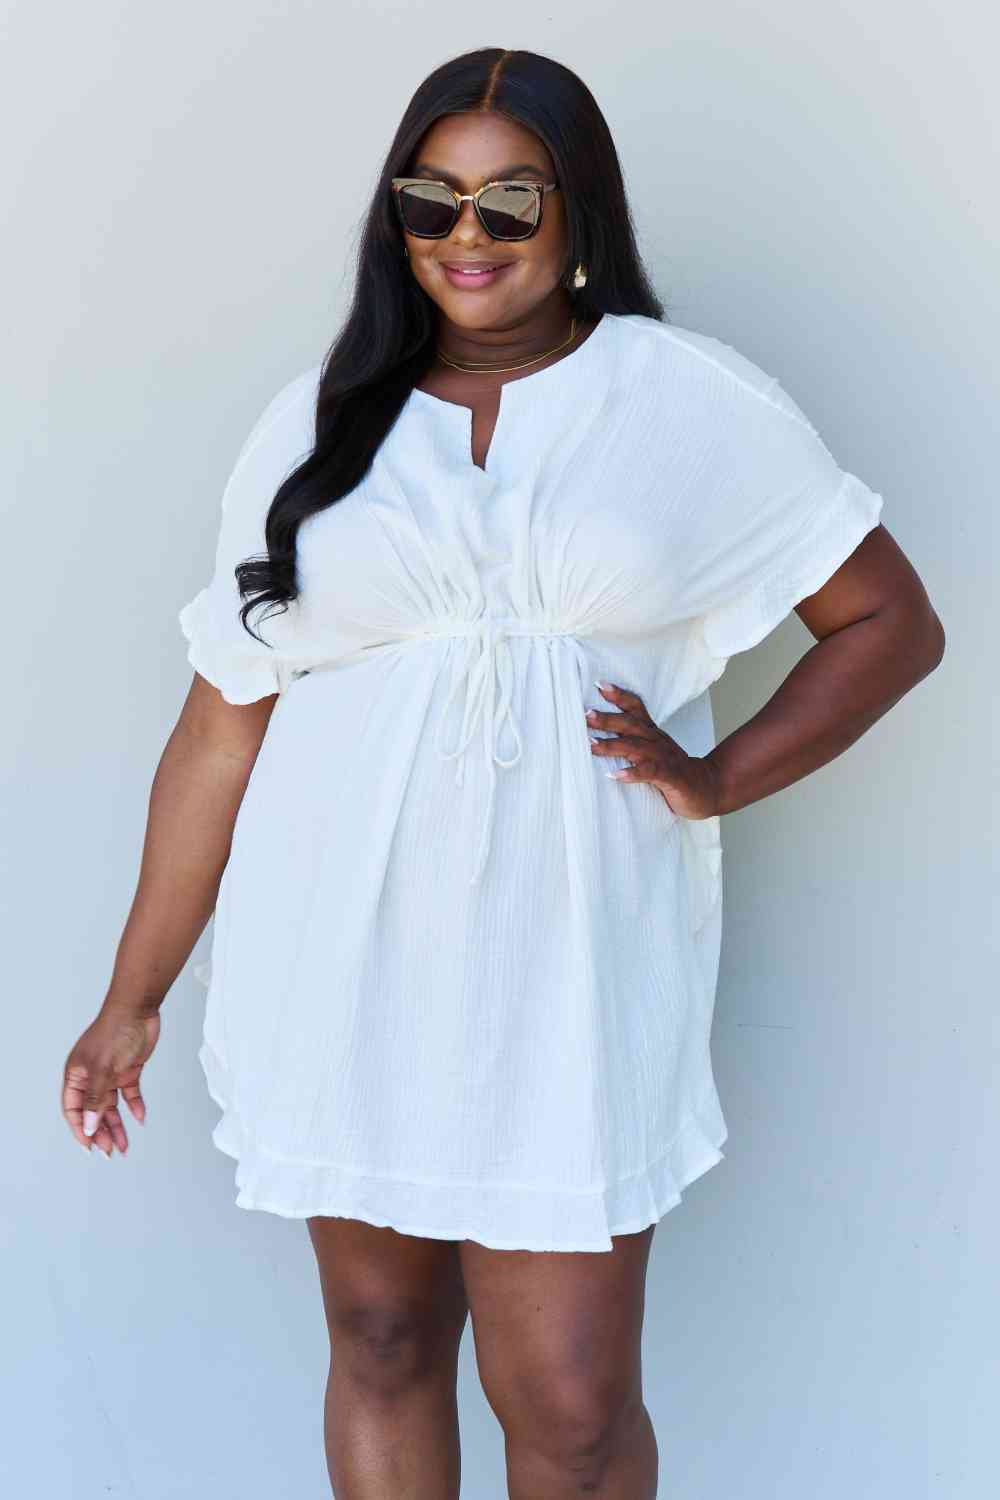 Ninexis Out Of Time Full Size Ruffle Hem Dress with Drawstring Waistband in White No 6